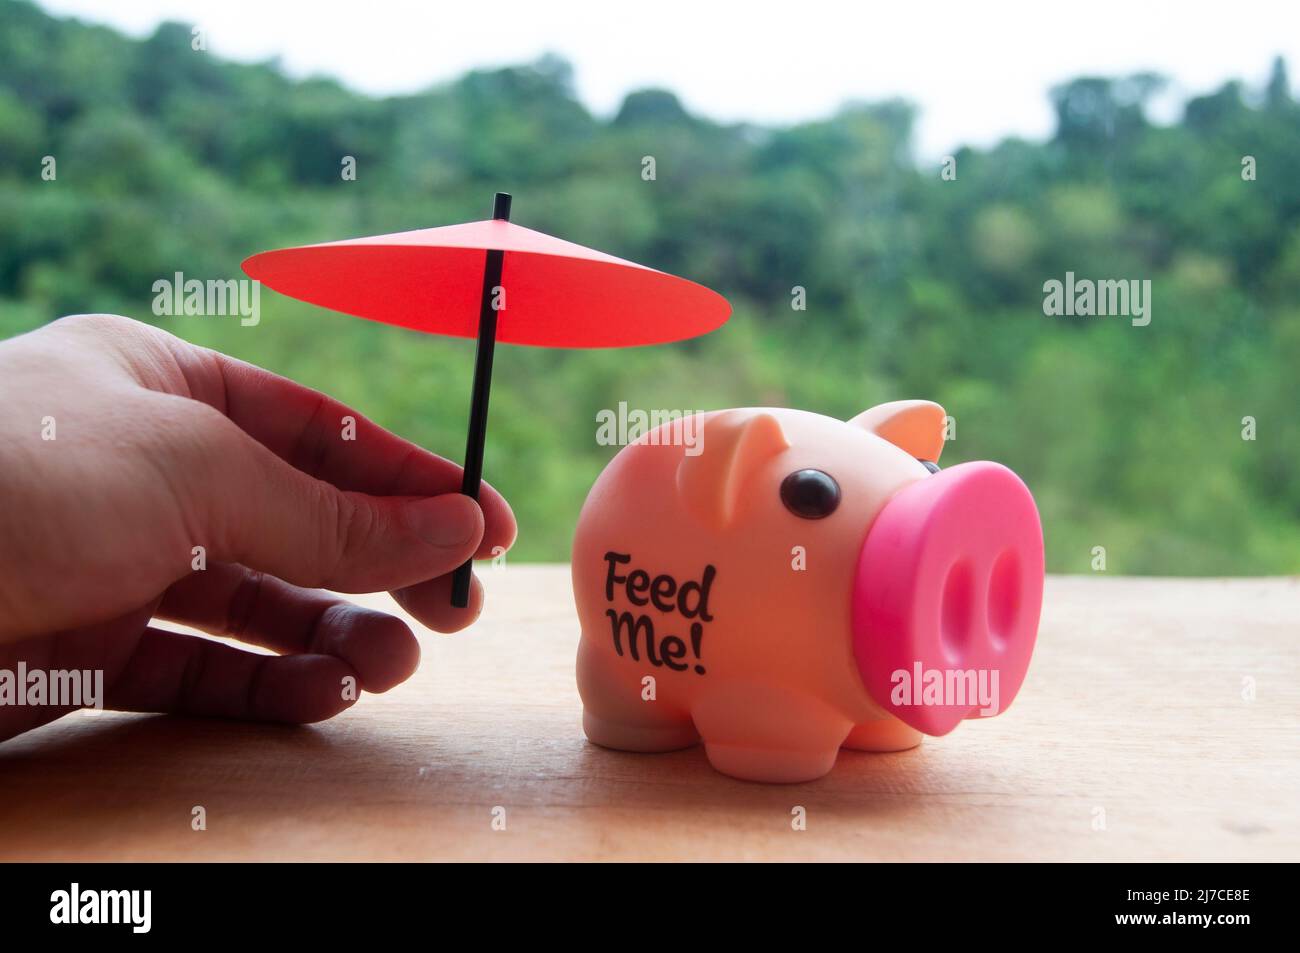 Hand holding small red umbrella over piggy bank on wooden table. Financial safety and investment concept. Stock Photo